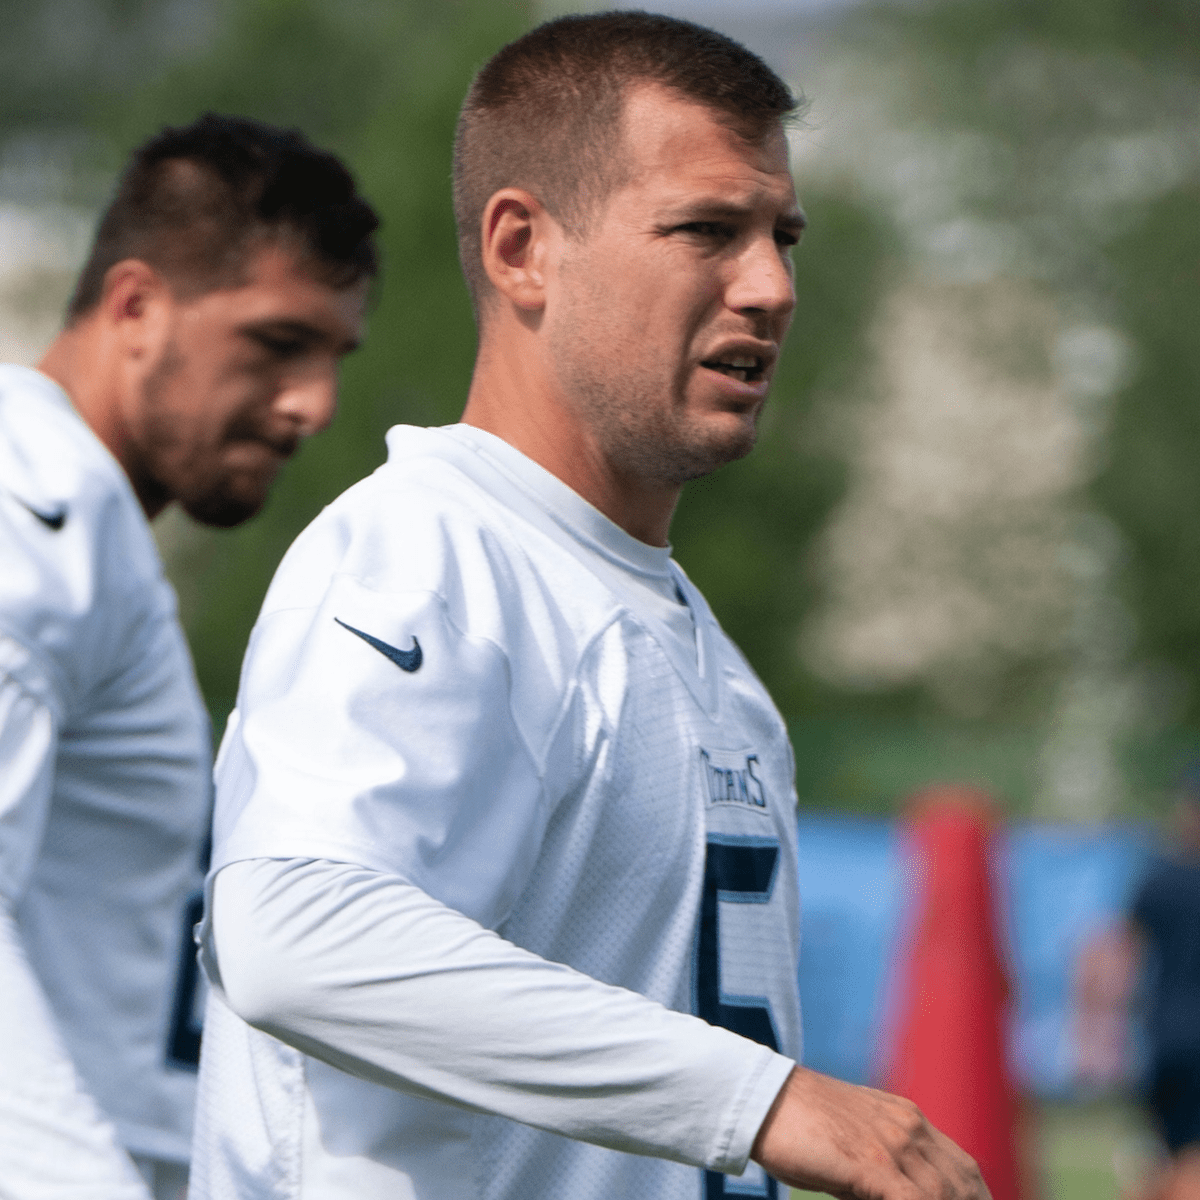 Brett Kern: Photos from every year of punter's career with Titans